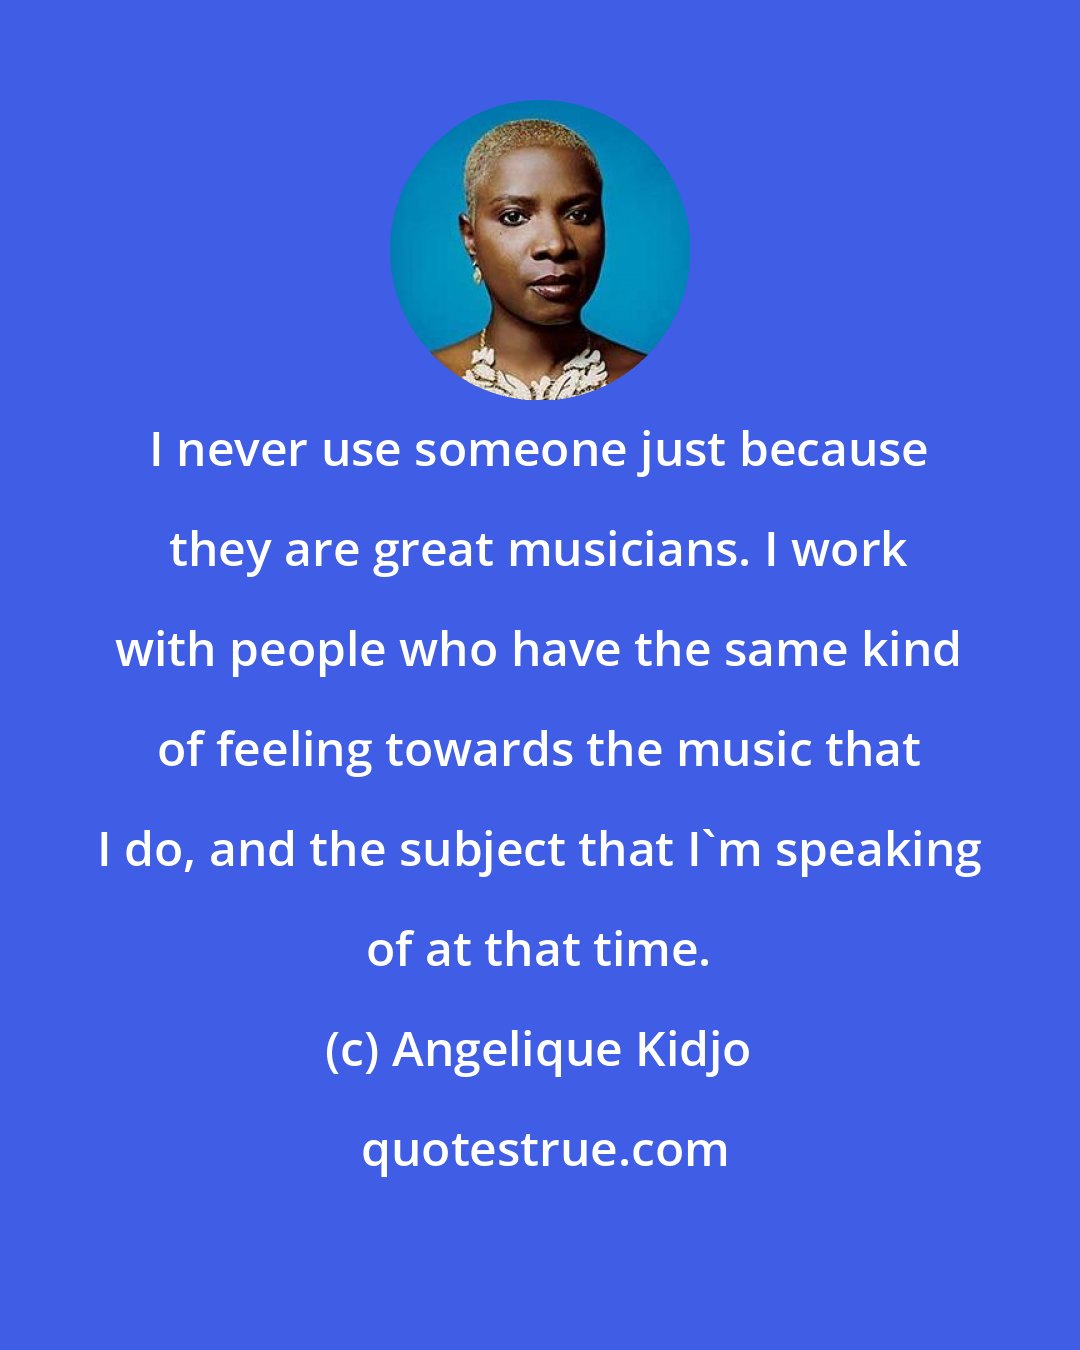 Angelique Kidjo: I never use someone just because they are great musicians. I work with people who have the same kind of feeling towards the music that I do, and the subject that I'm speaking of at that time.